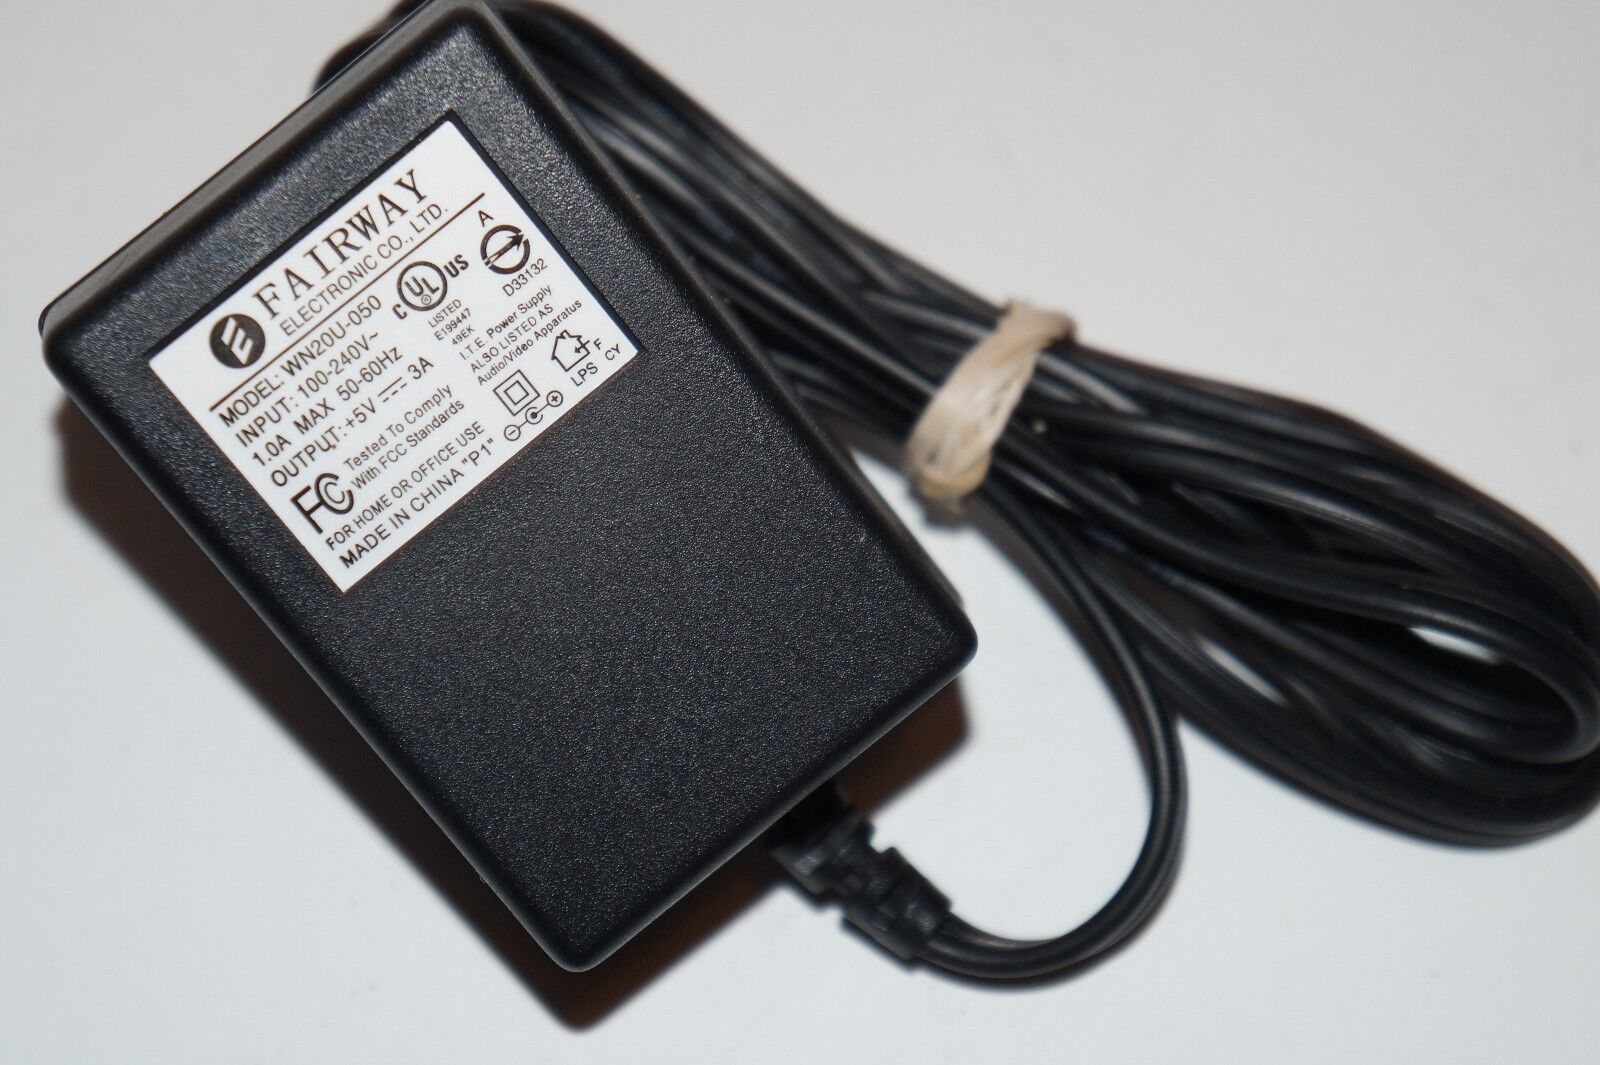 AC DC Power Adapter for Fairway WRG2-F-050A 5V 3000mA 3A 5.5mm Plug Tip Center+ Specifications: Type: AC to DC Standard